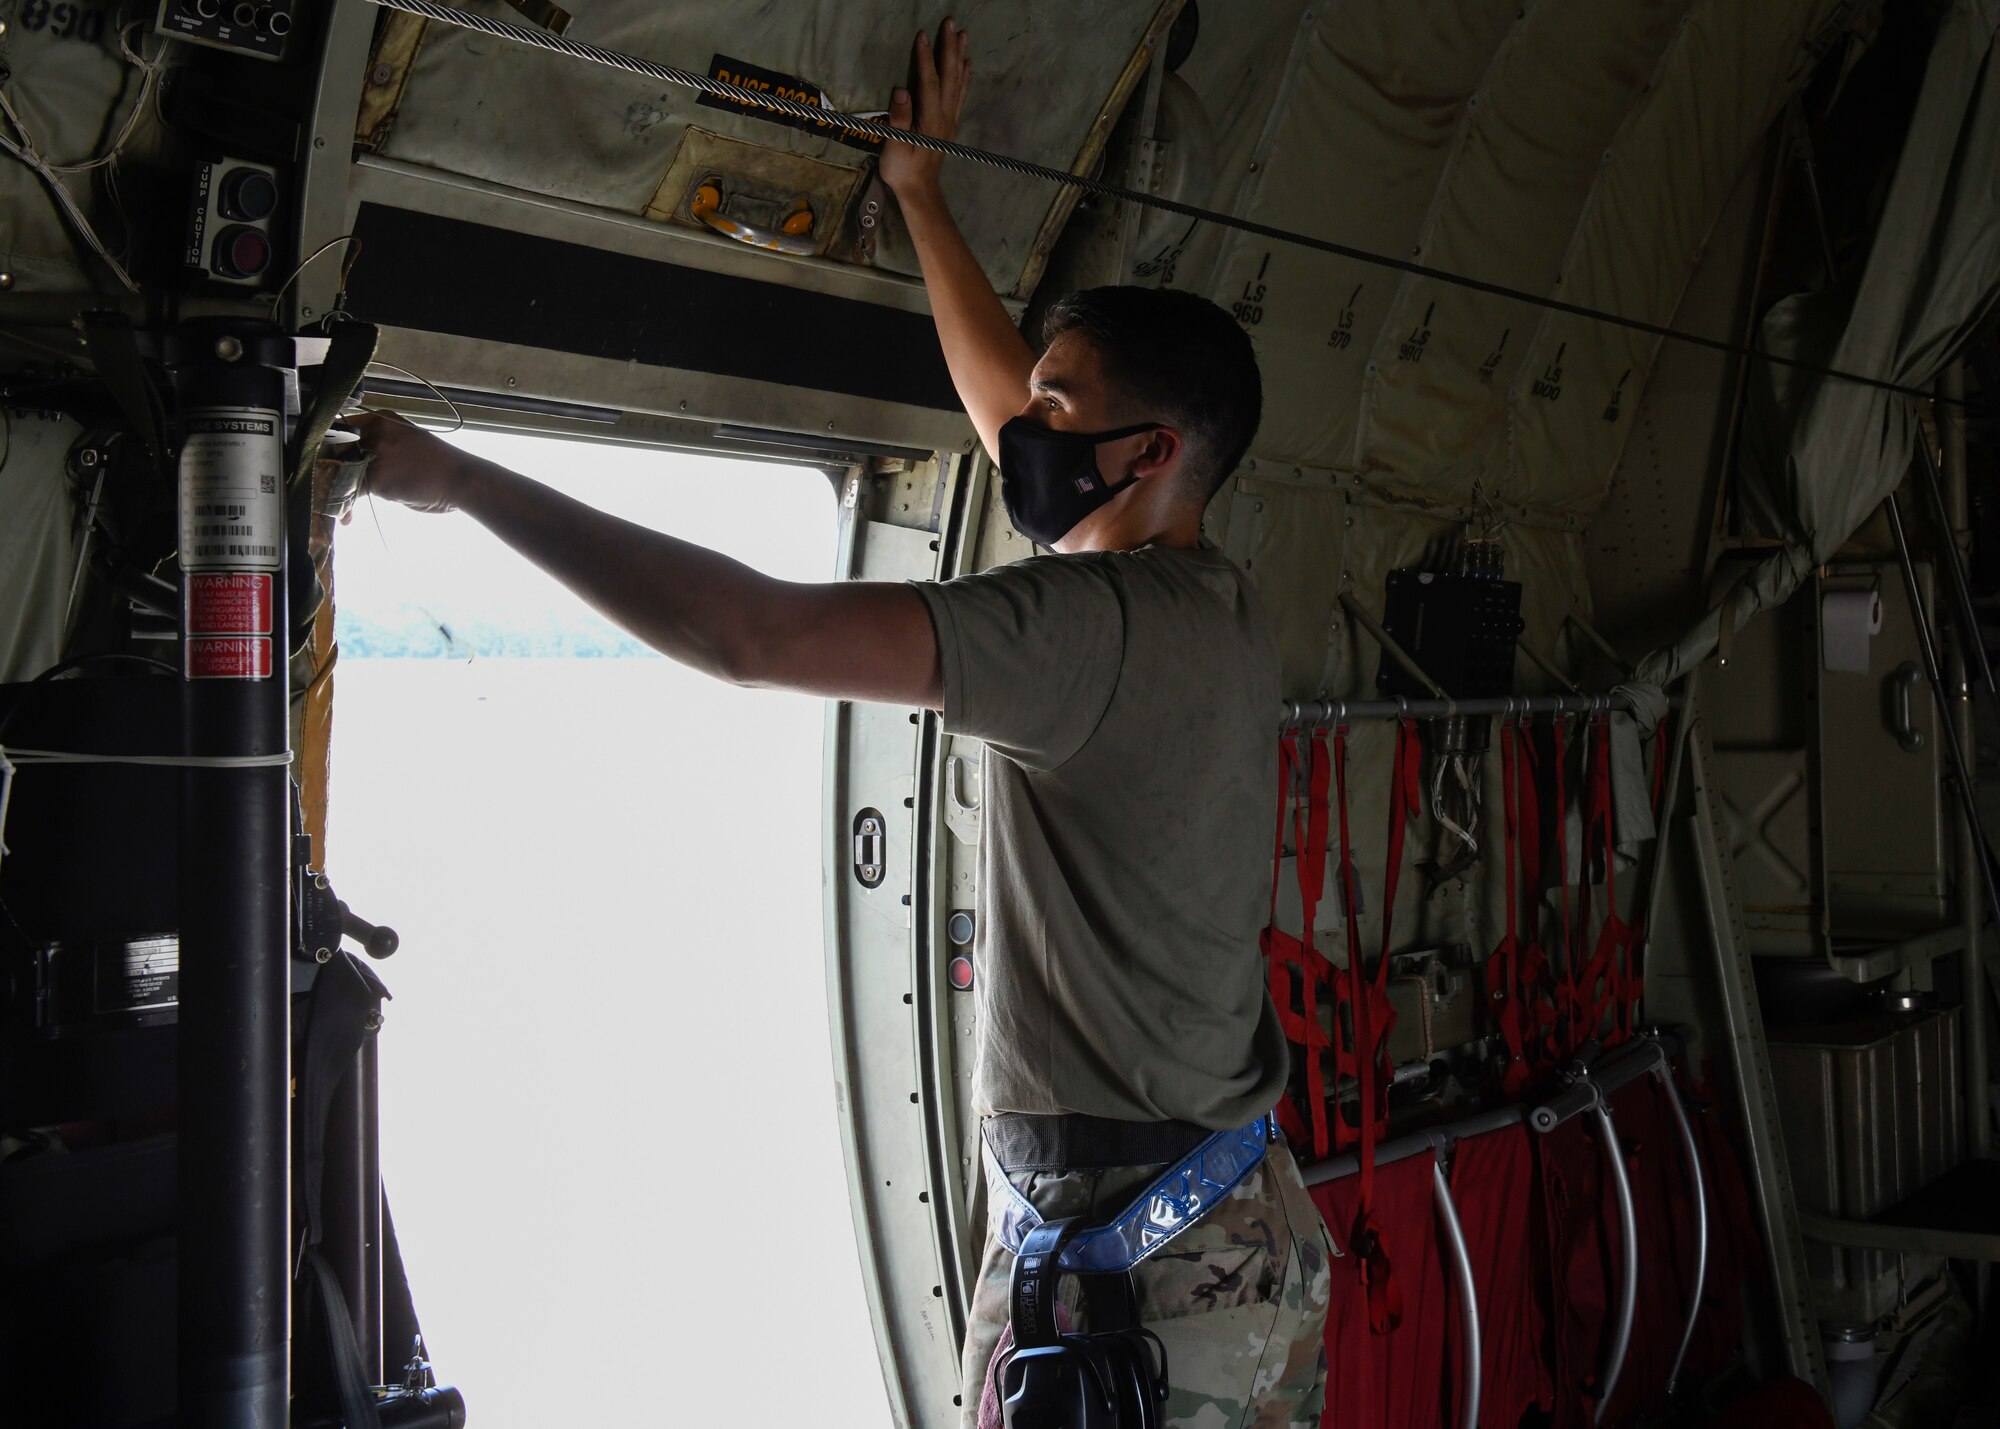 U.S. Air Force Reserve Airman 1st Class Micco Moore, 913th Aircraft Maintenance Squadron crew chief, opens the door of a C-130J Super Hercules at Little Rock Air Force Base, Ark., Sept. 10, 2020.  Moore used his passion and determination to fuel himself through training and stand out amongst his fellow Airmen along the way. (U.S. Air Force Reserve photo by Airman 1st Class Julia Ford)